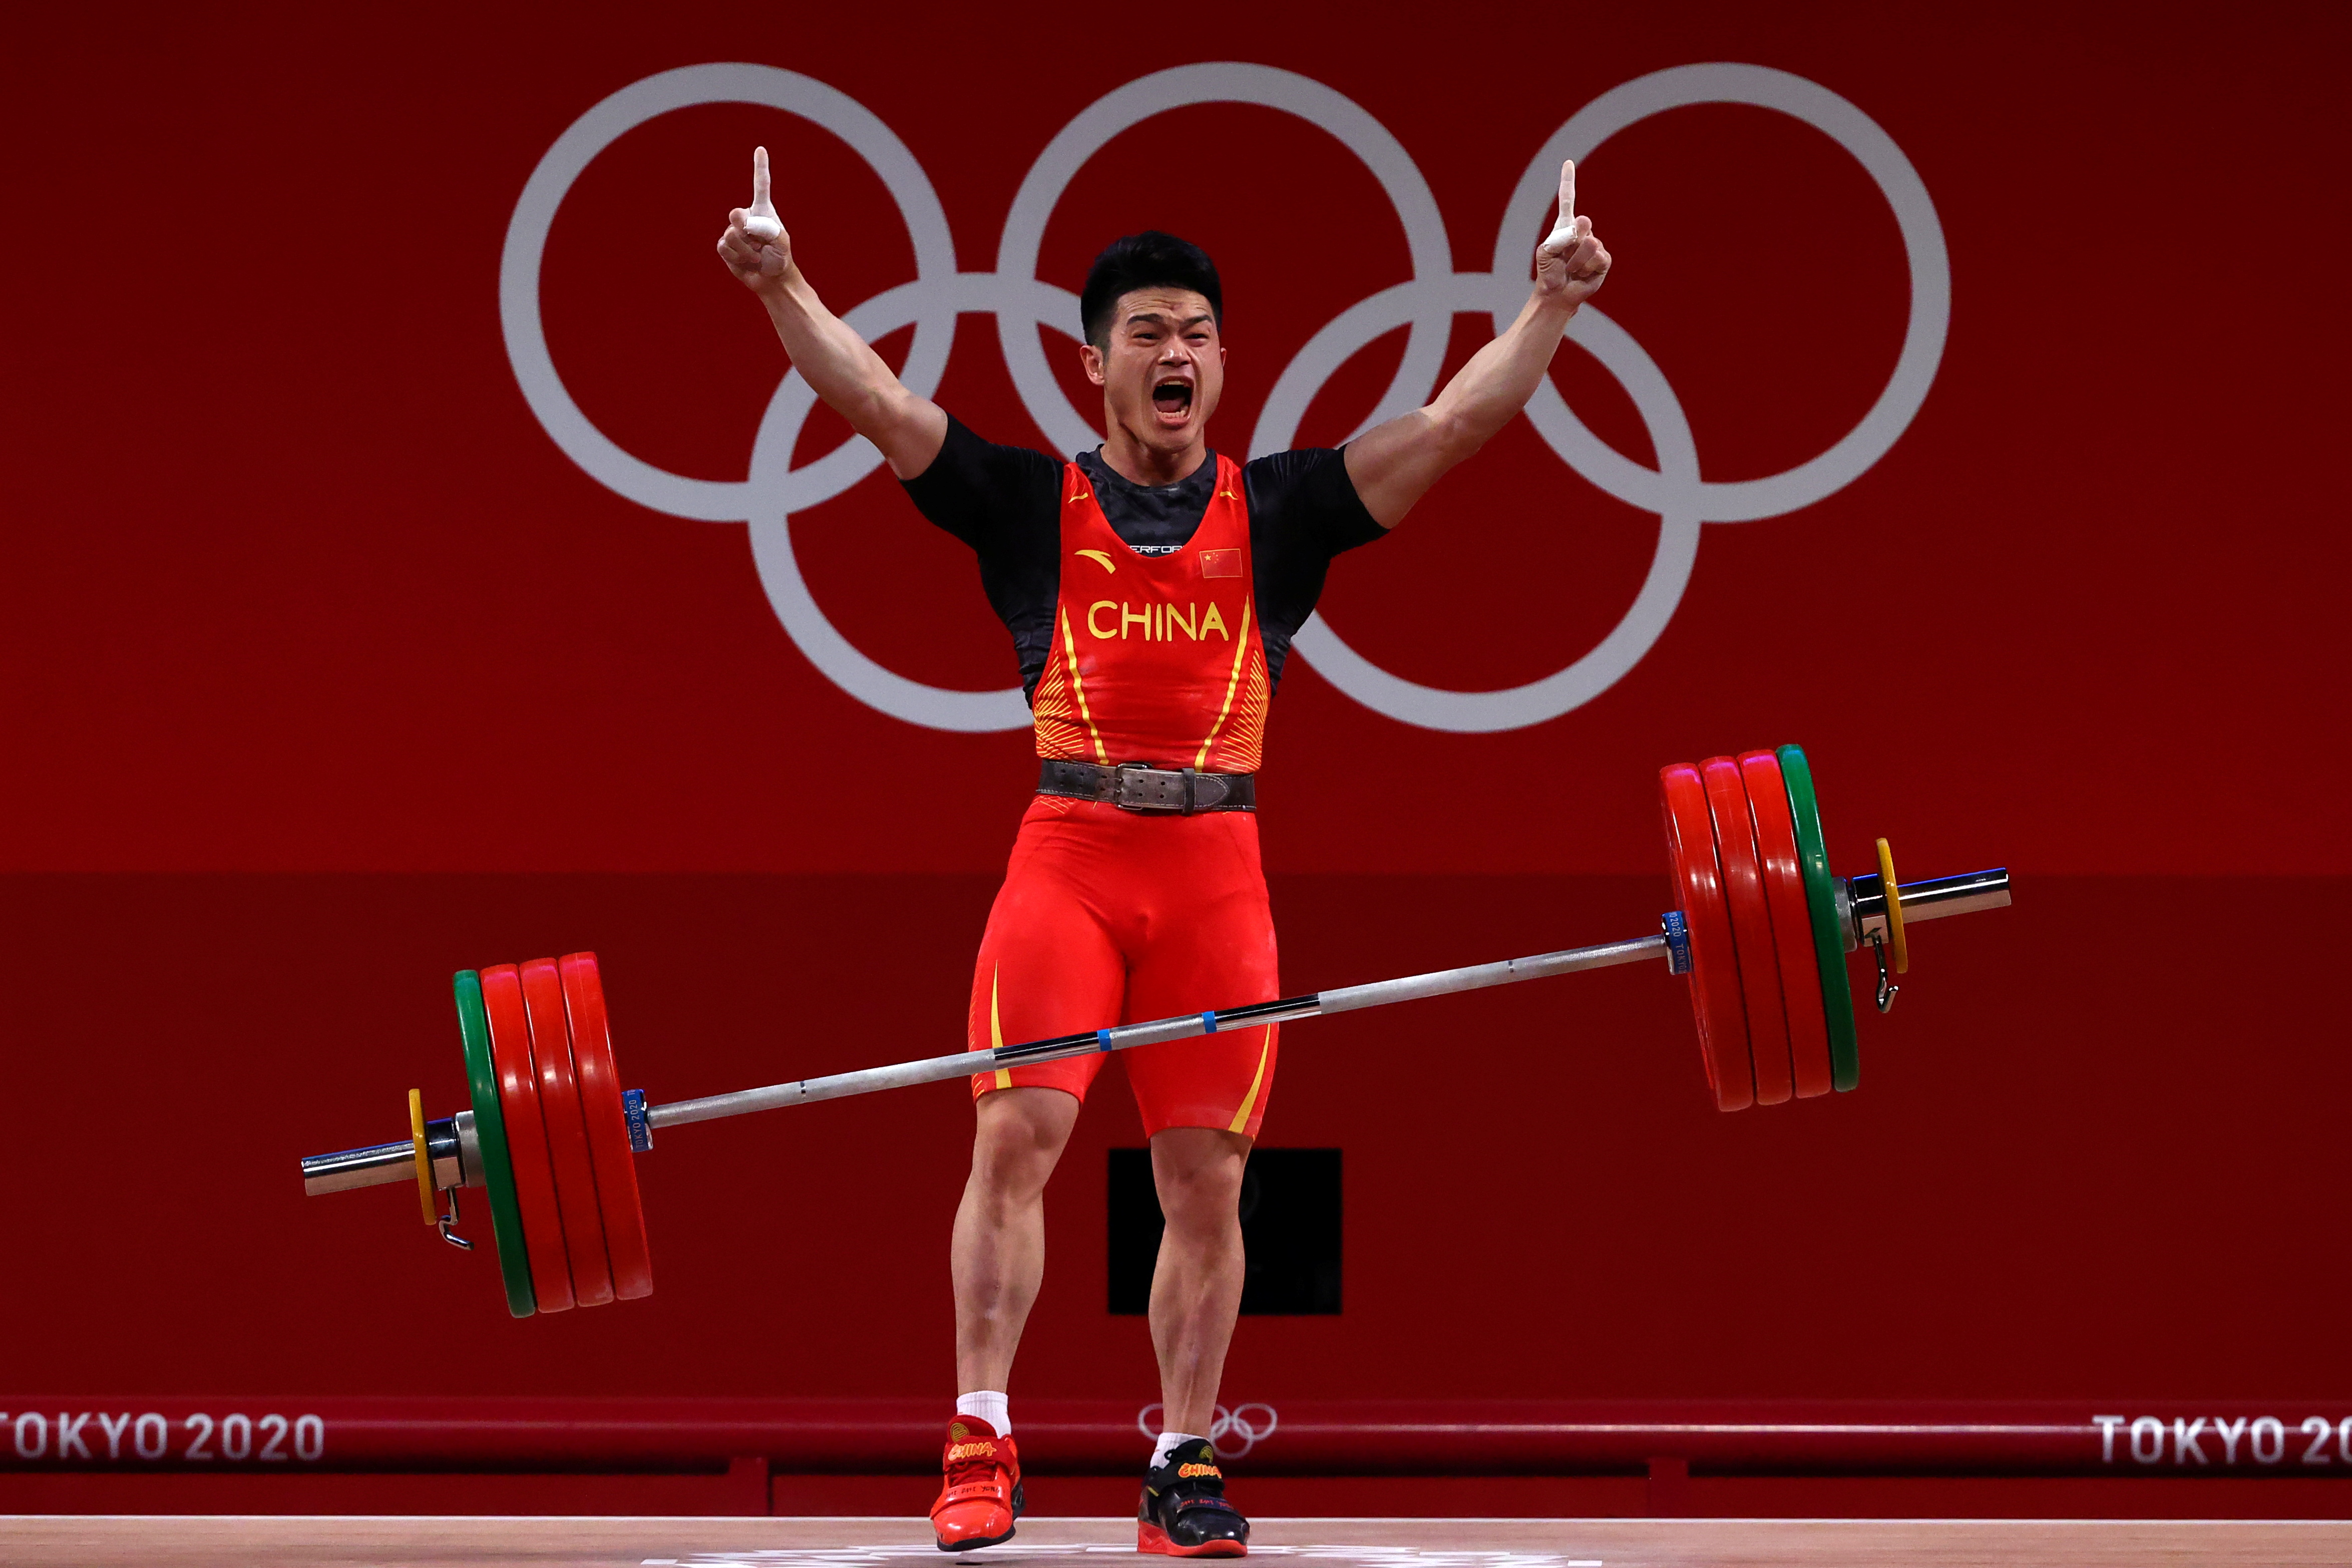 pie prejudice Induce Weightlifting-China's Shi breaks world record to win gold in 73kg category  | Reuters